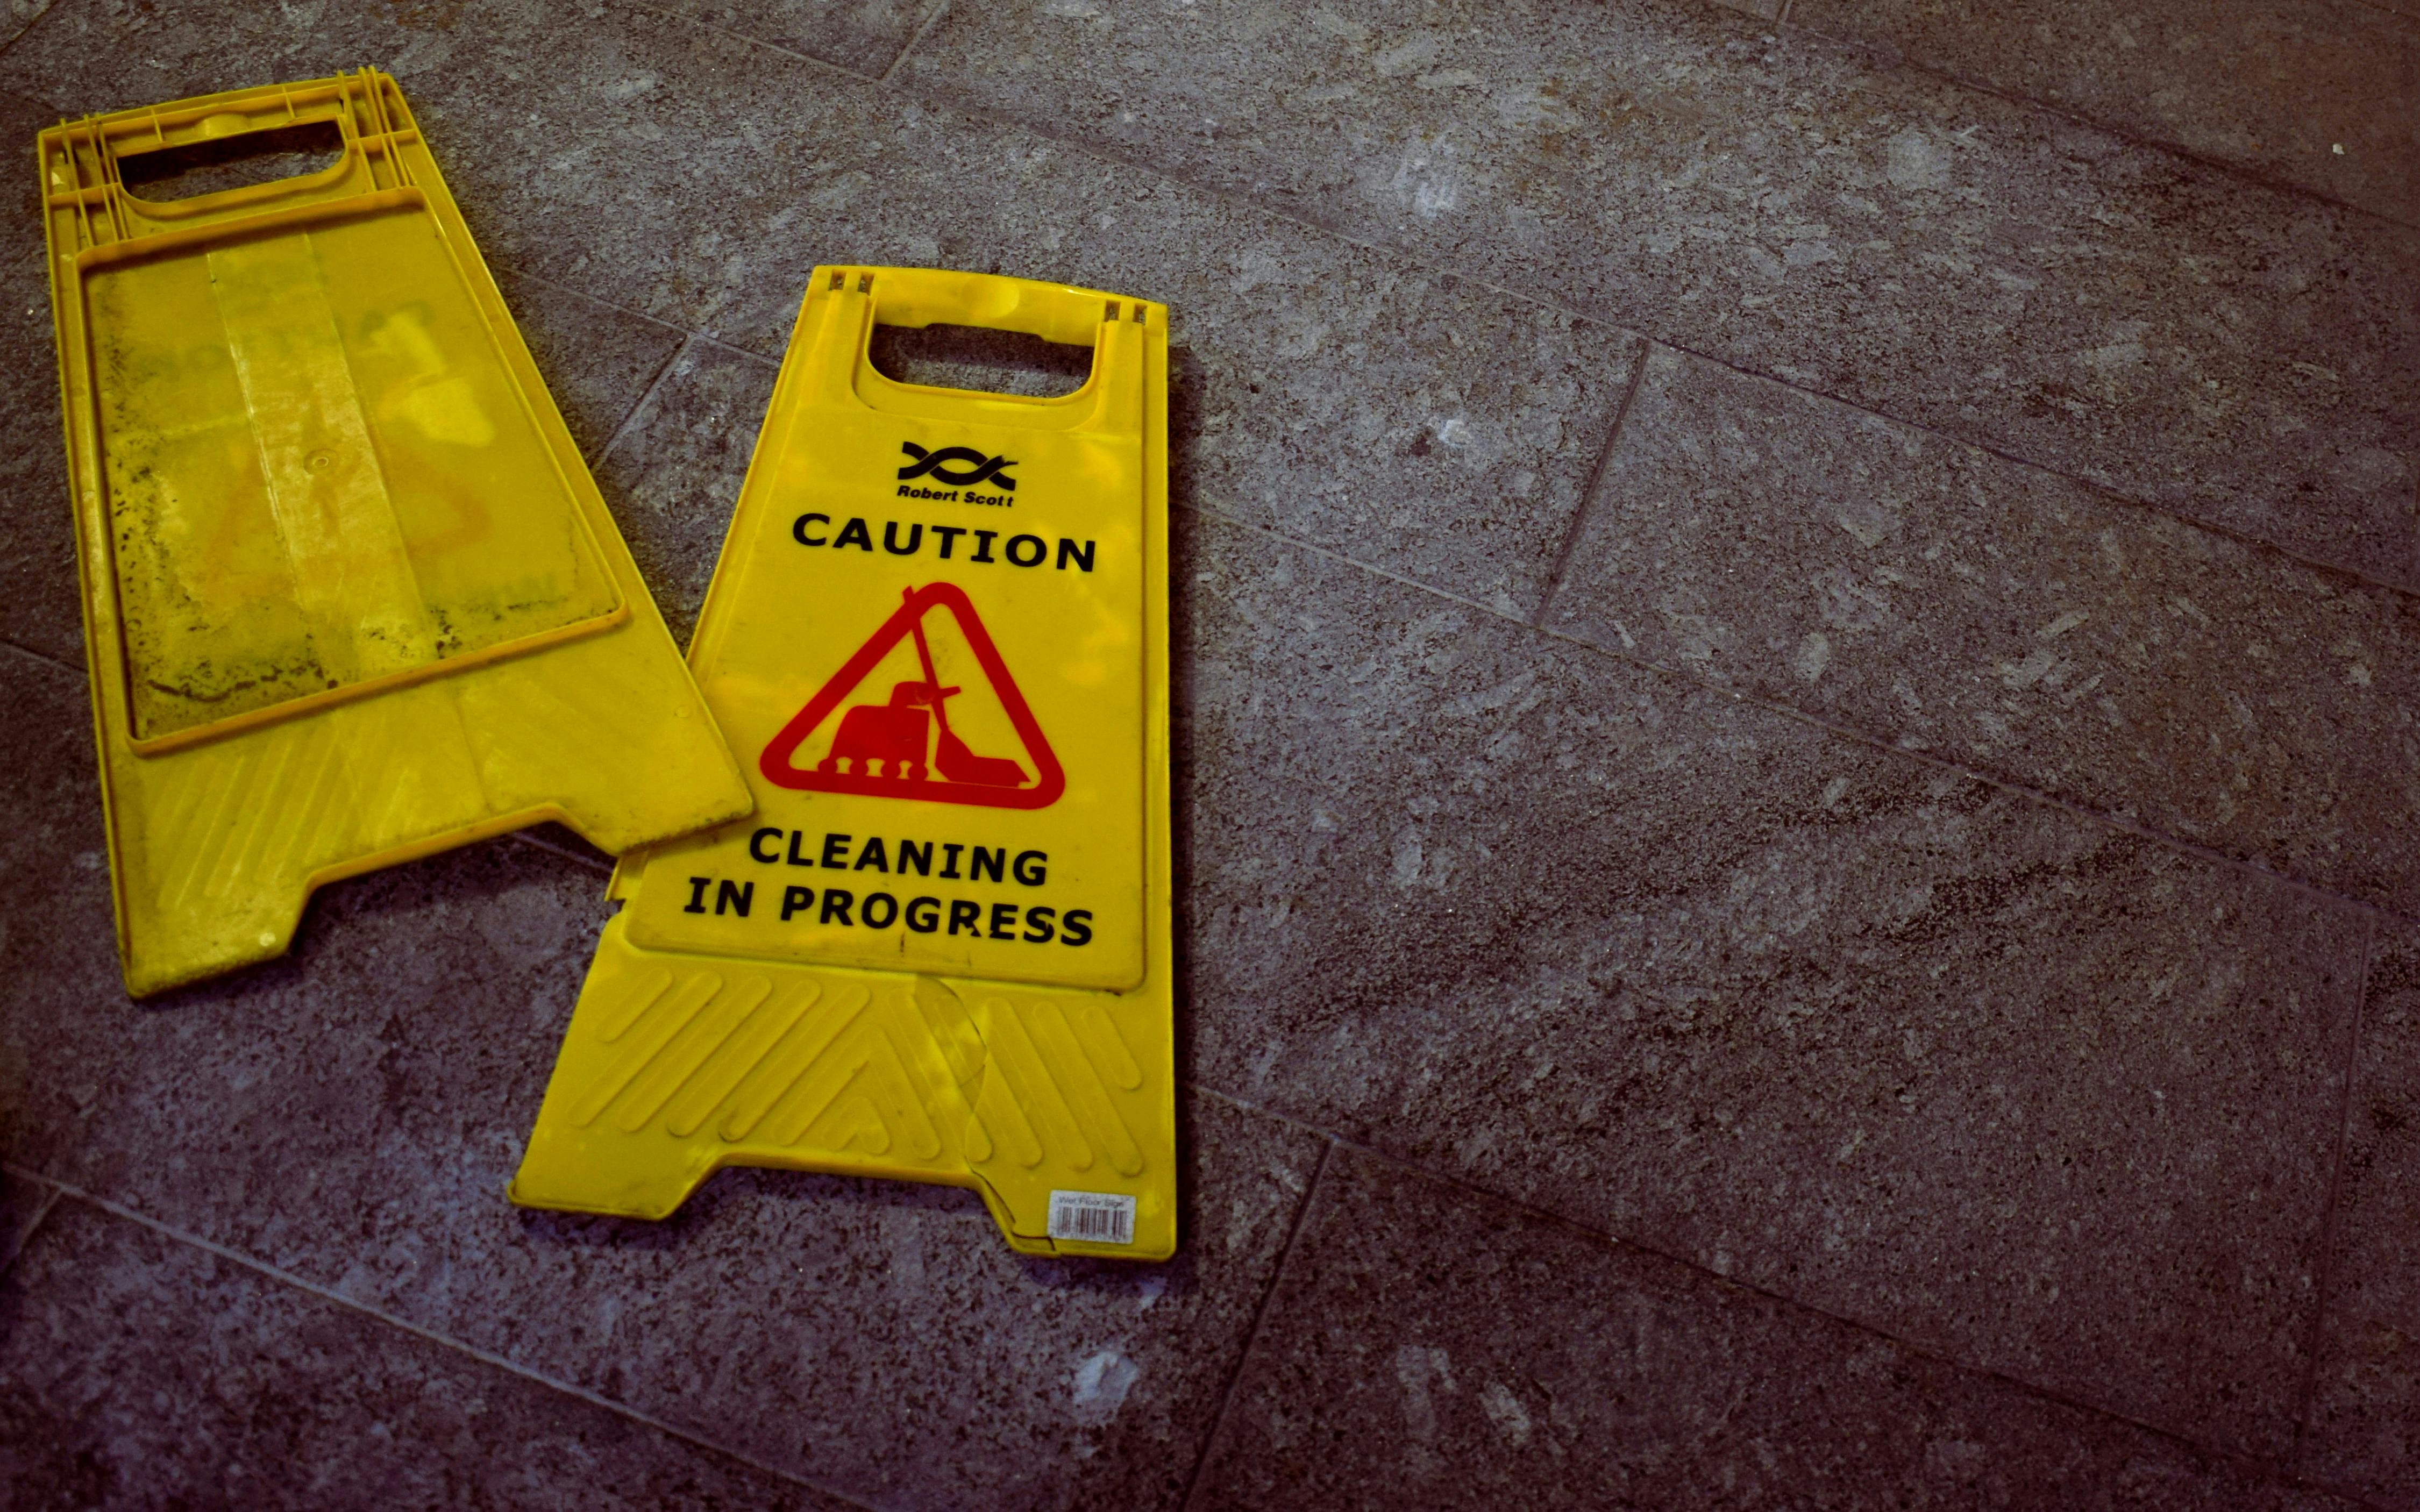 HSA inspections: A business owners guide to health & safety compliance